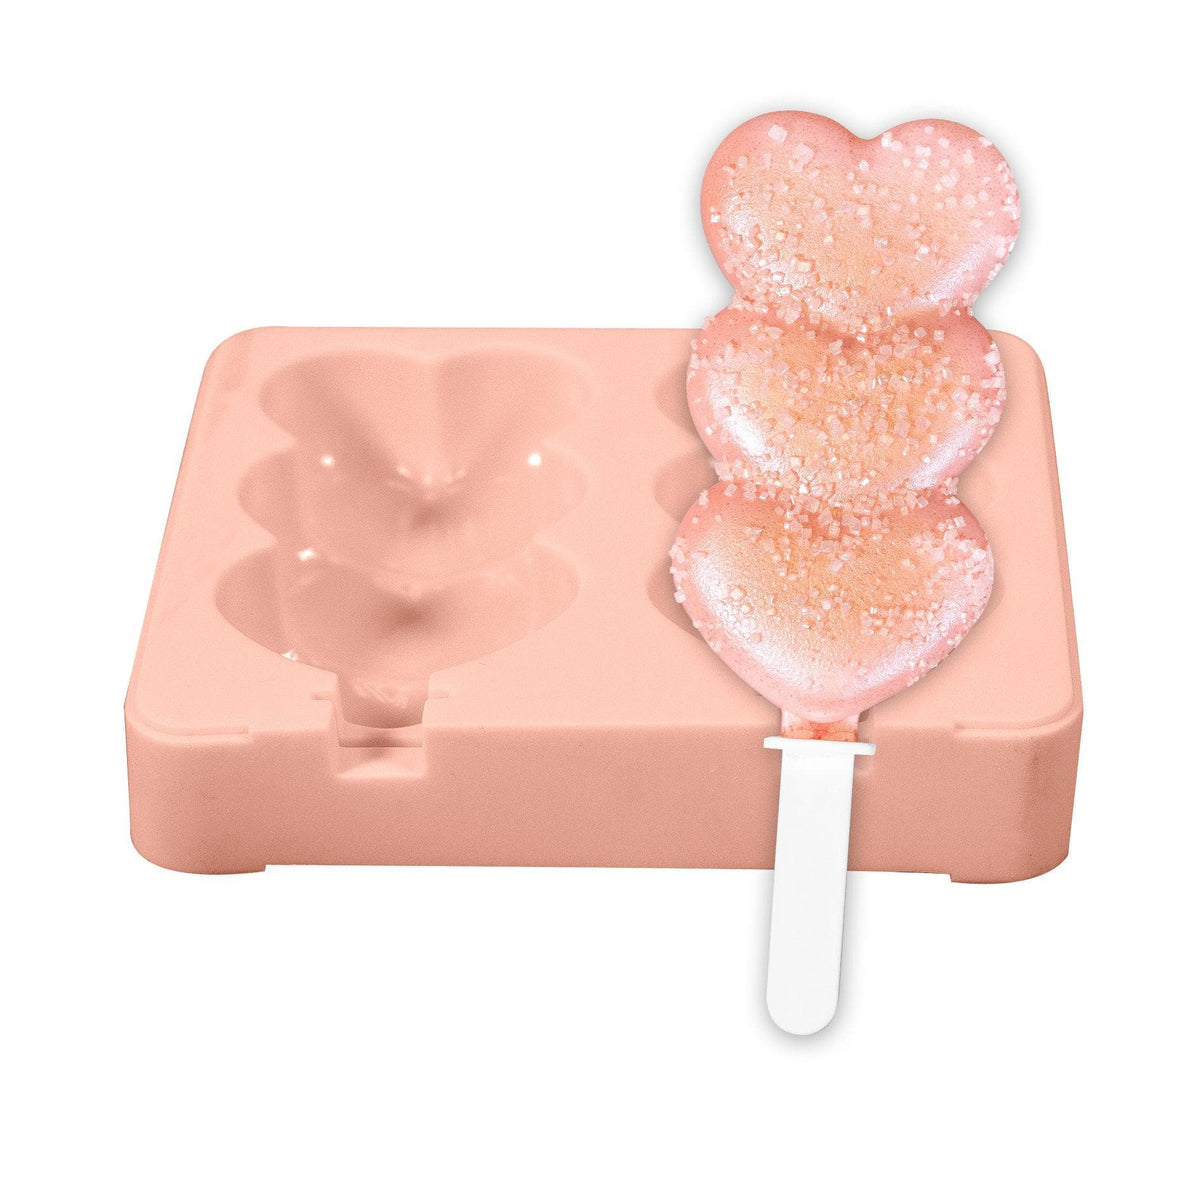 Double Hearts Silicone Cakesicle Mold